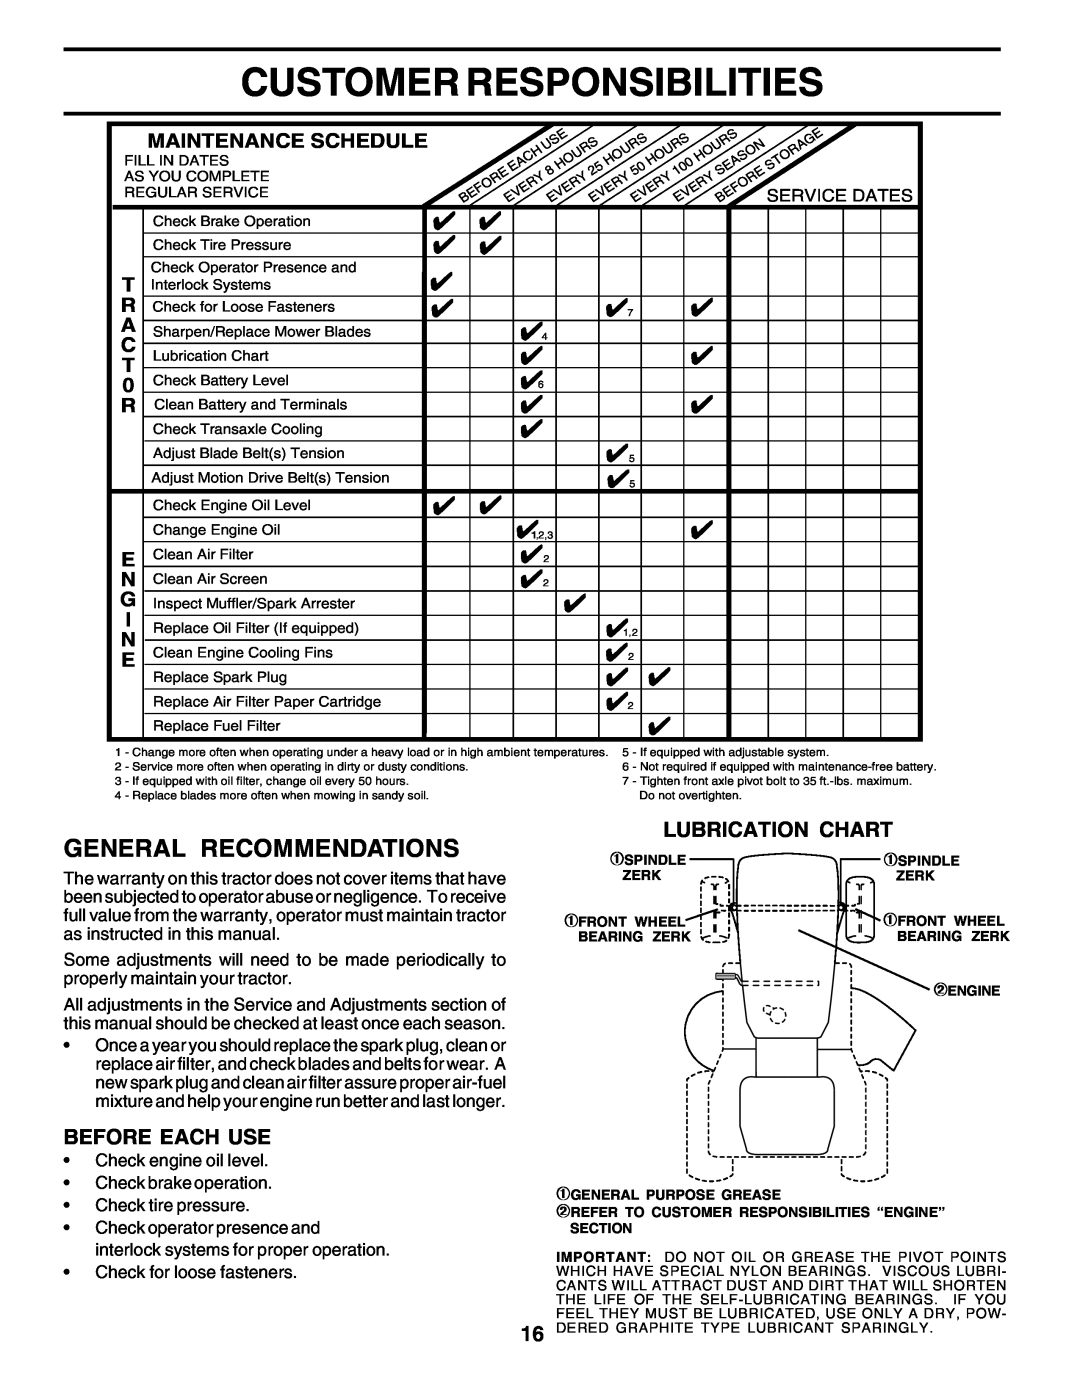 Weed Eater 178387 owner manual Customer Responsibilities, General Recommendations, Before Each Use, Maintenance Schedule 